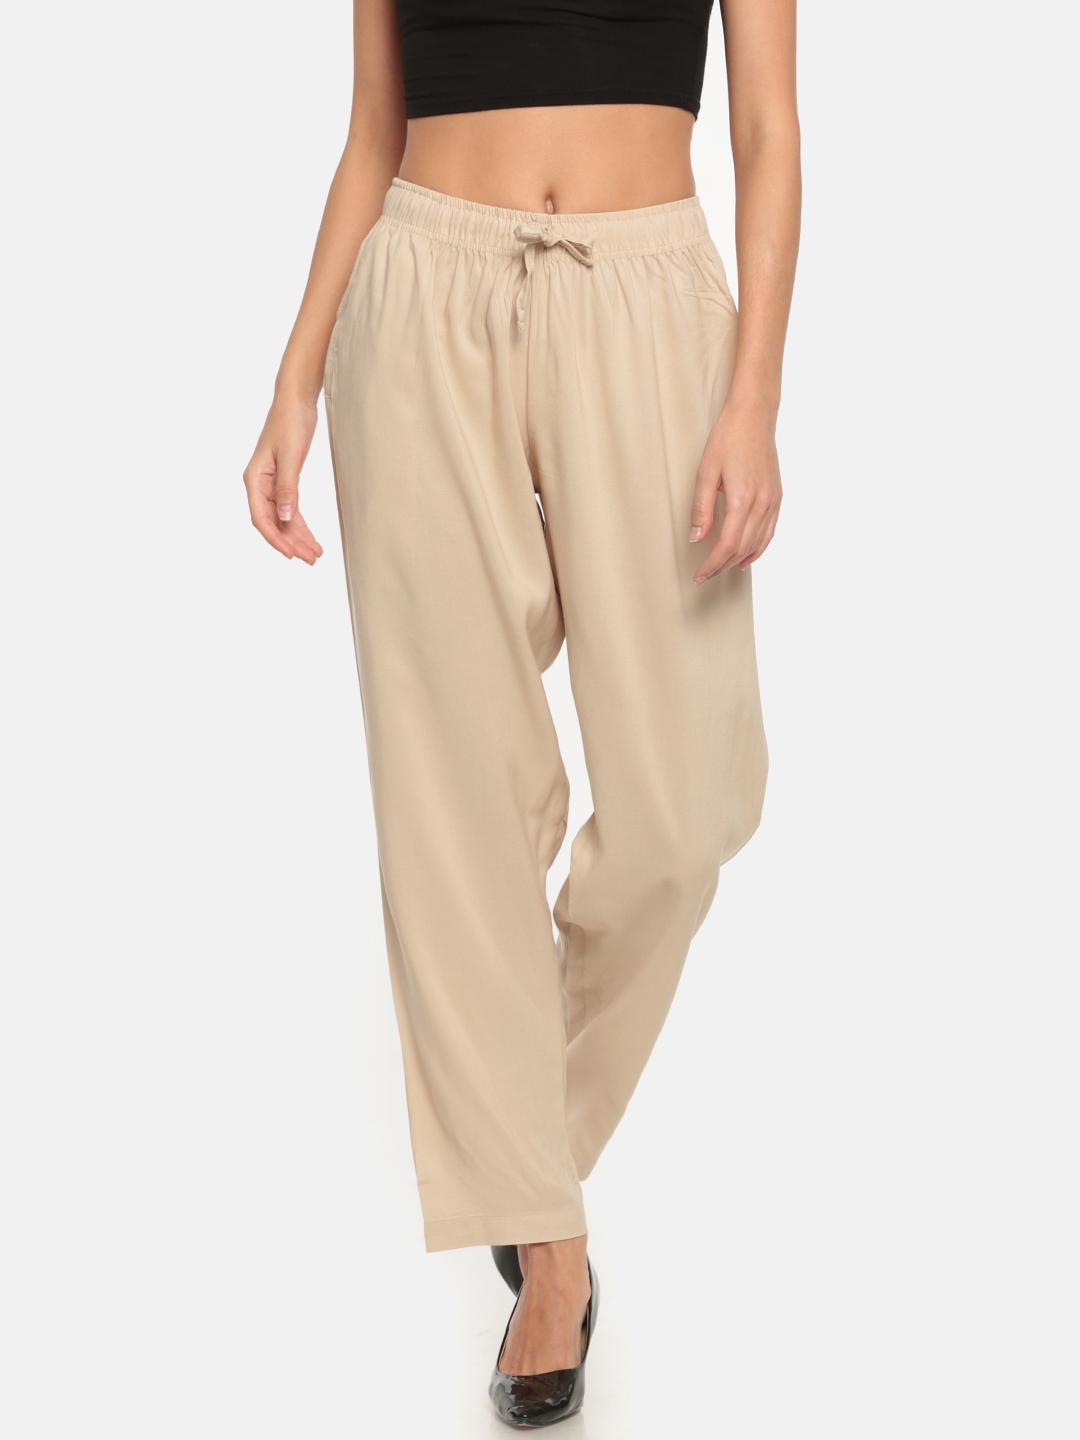 Buy Casual Pants for Women, Casual Trousers for Women Online at Fabindia-seedfund.vn